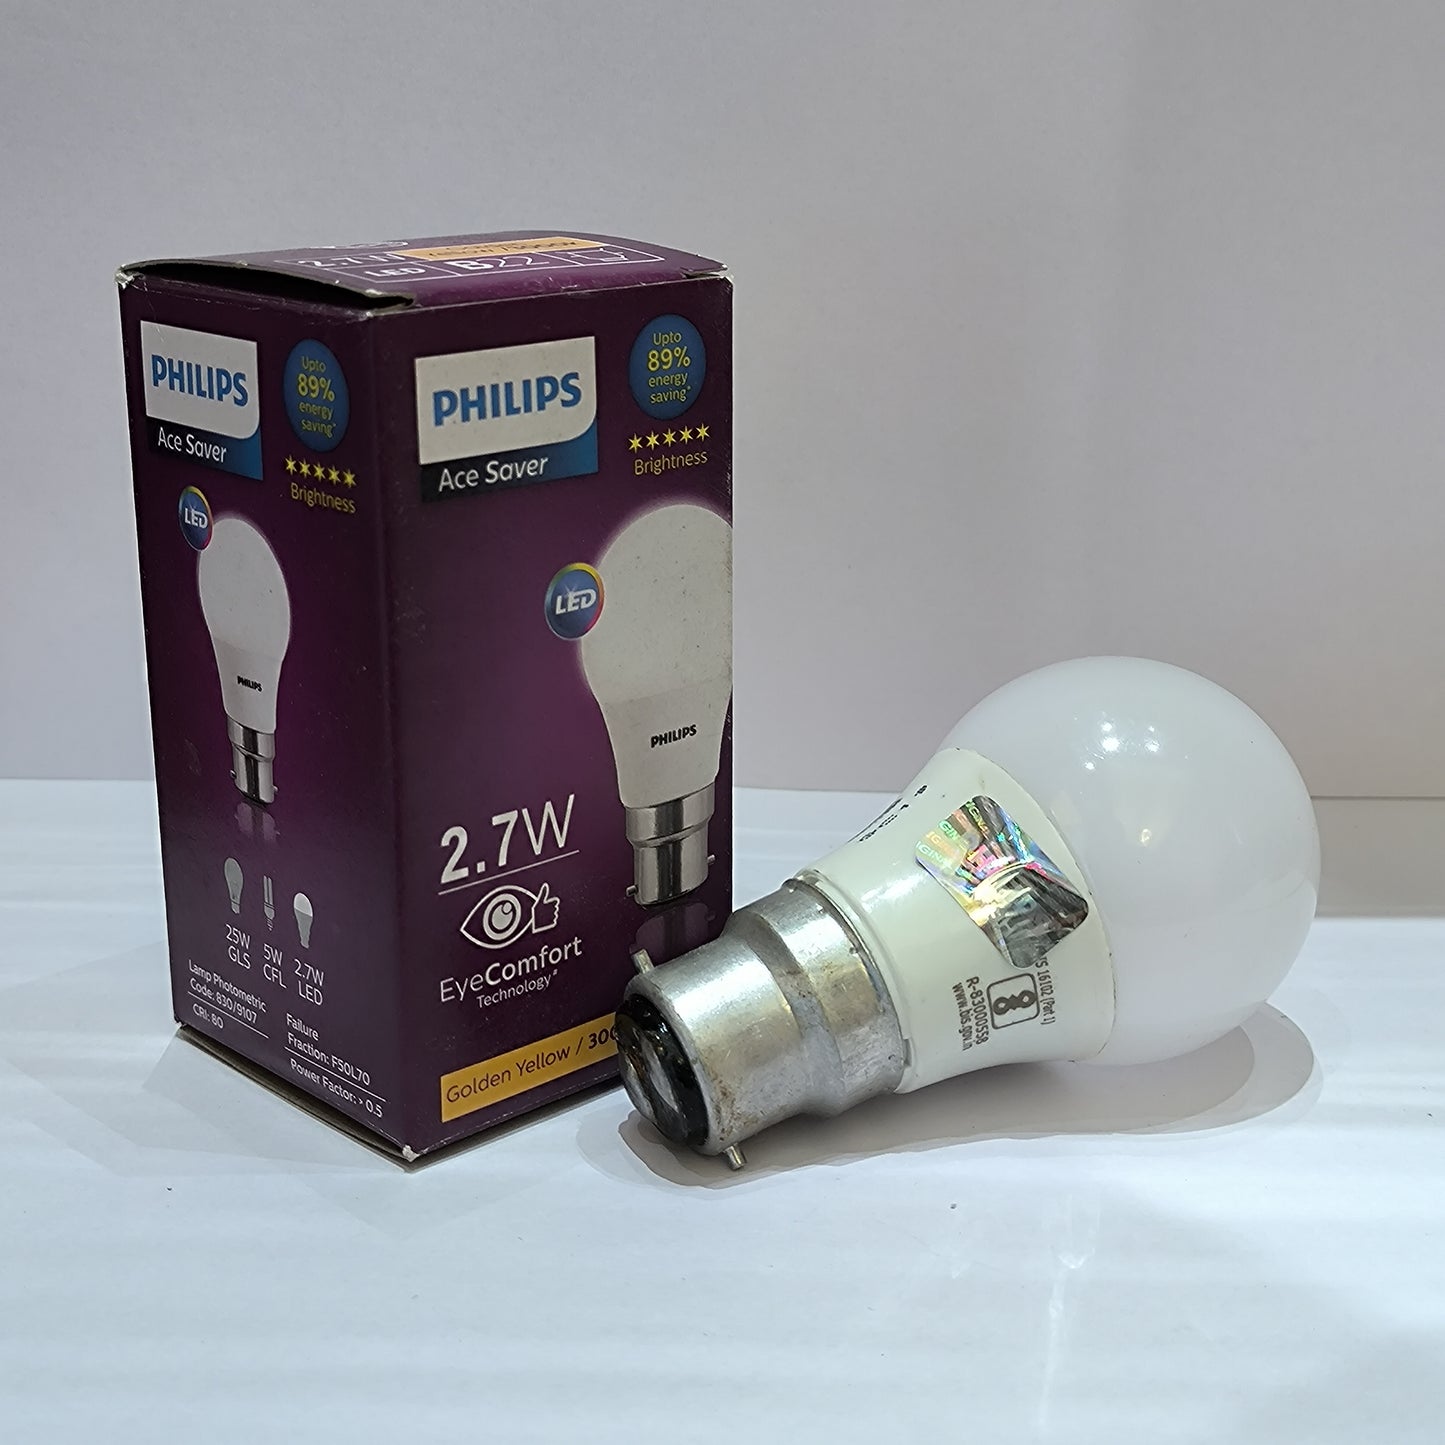 Ace Saver 2.7W LED Bulb Golden Yellow, Round Shape Bulb by Philips(B-22)